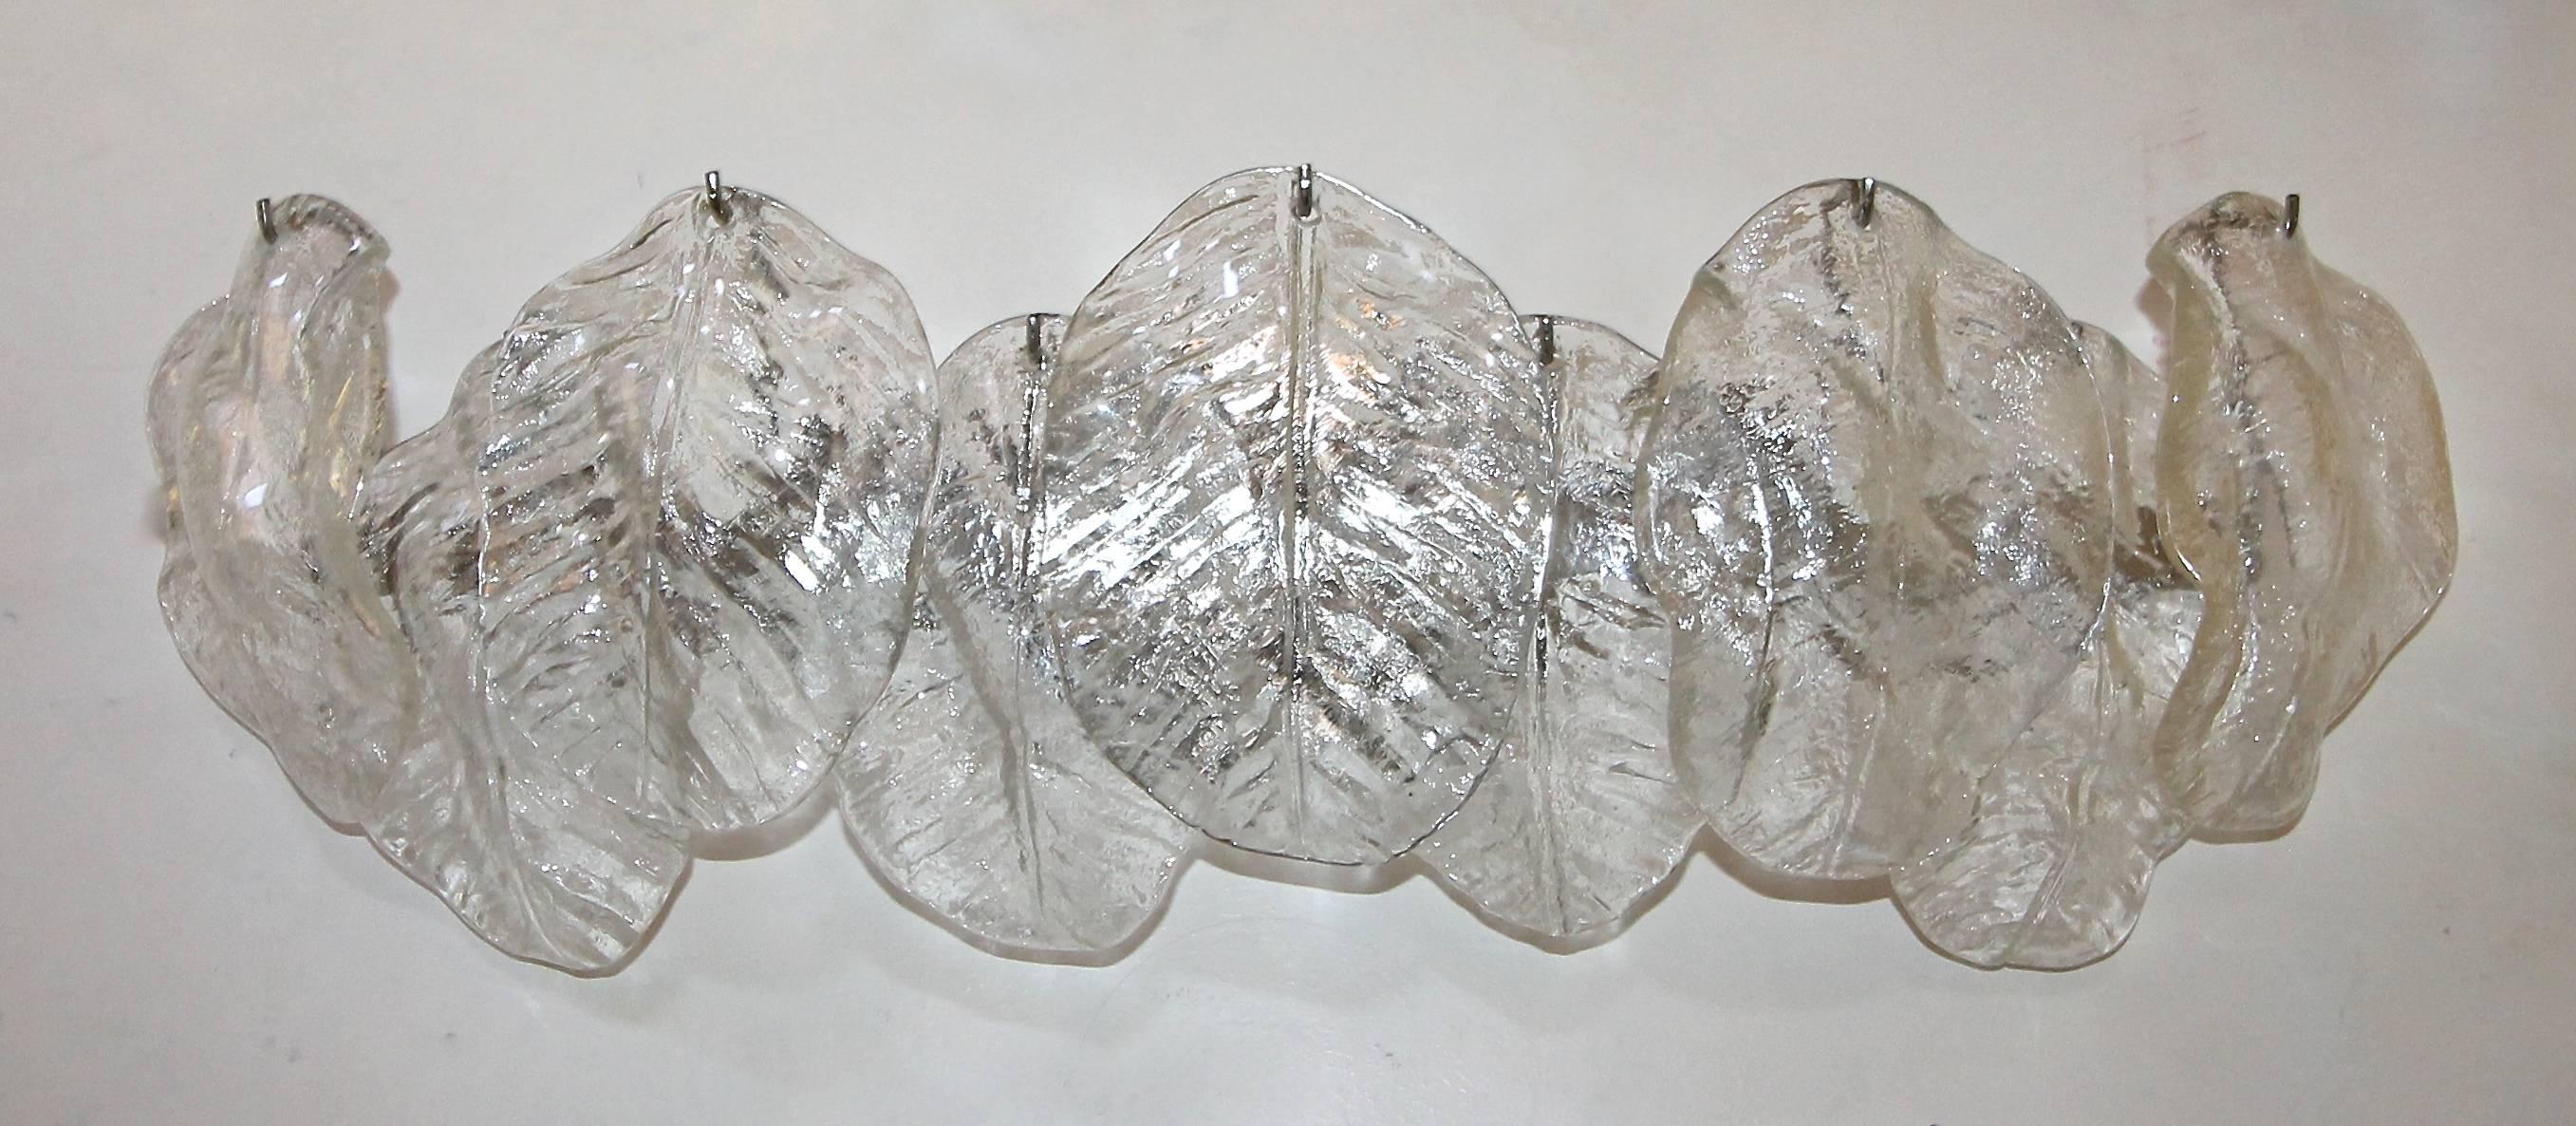 Pair of elongated Italian Murano glass wall sconces with clear textured glass leaves attributed to Mazzega. Nickel-plated steel backplates with six - candelabra B base bulbs newly wired for US. These are a harder to find style that would work well